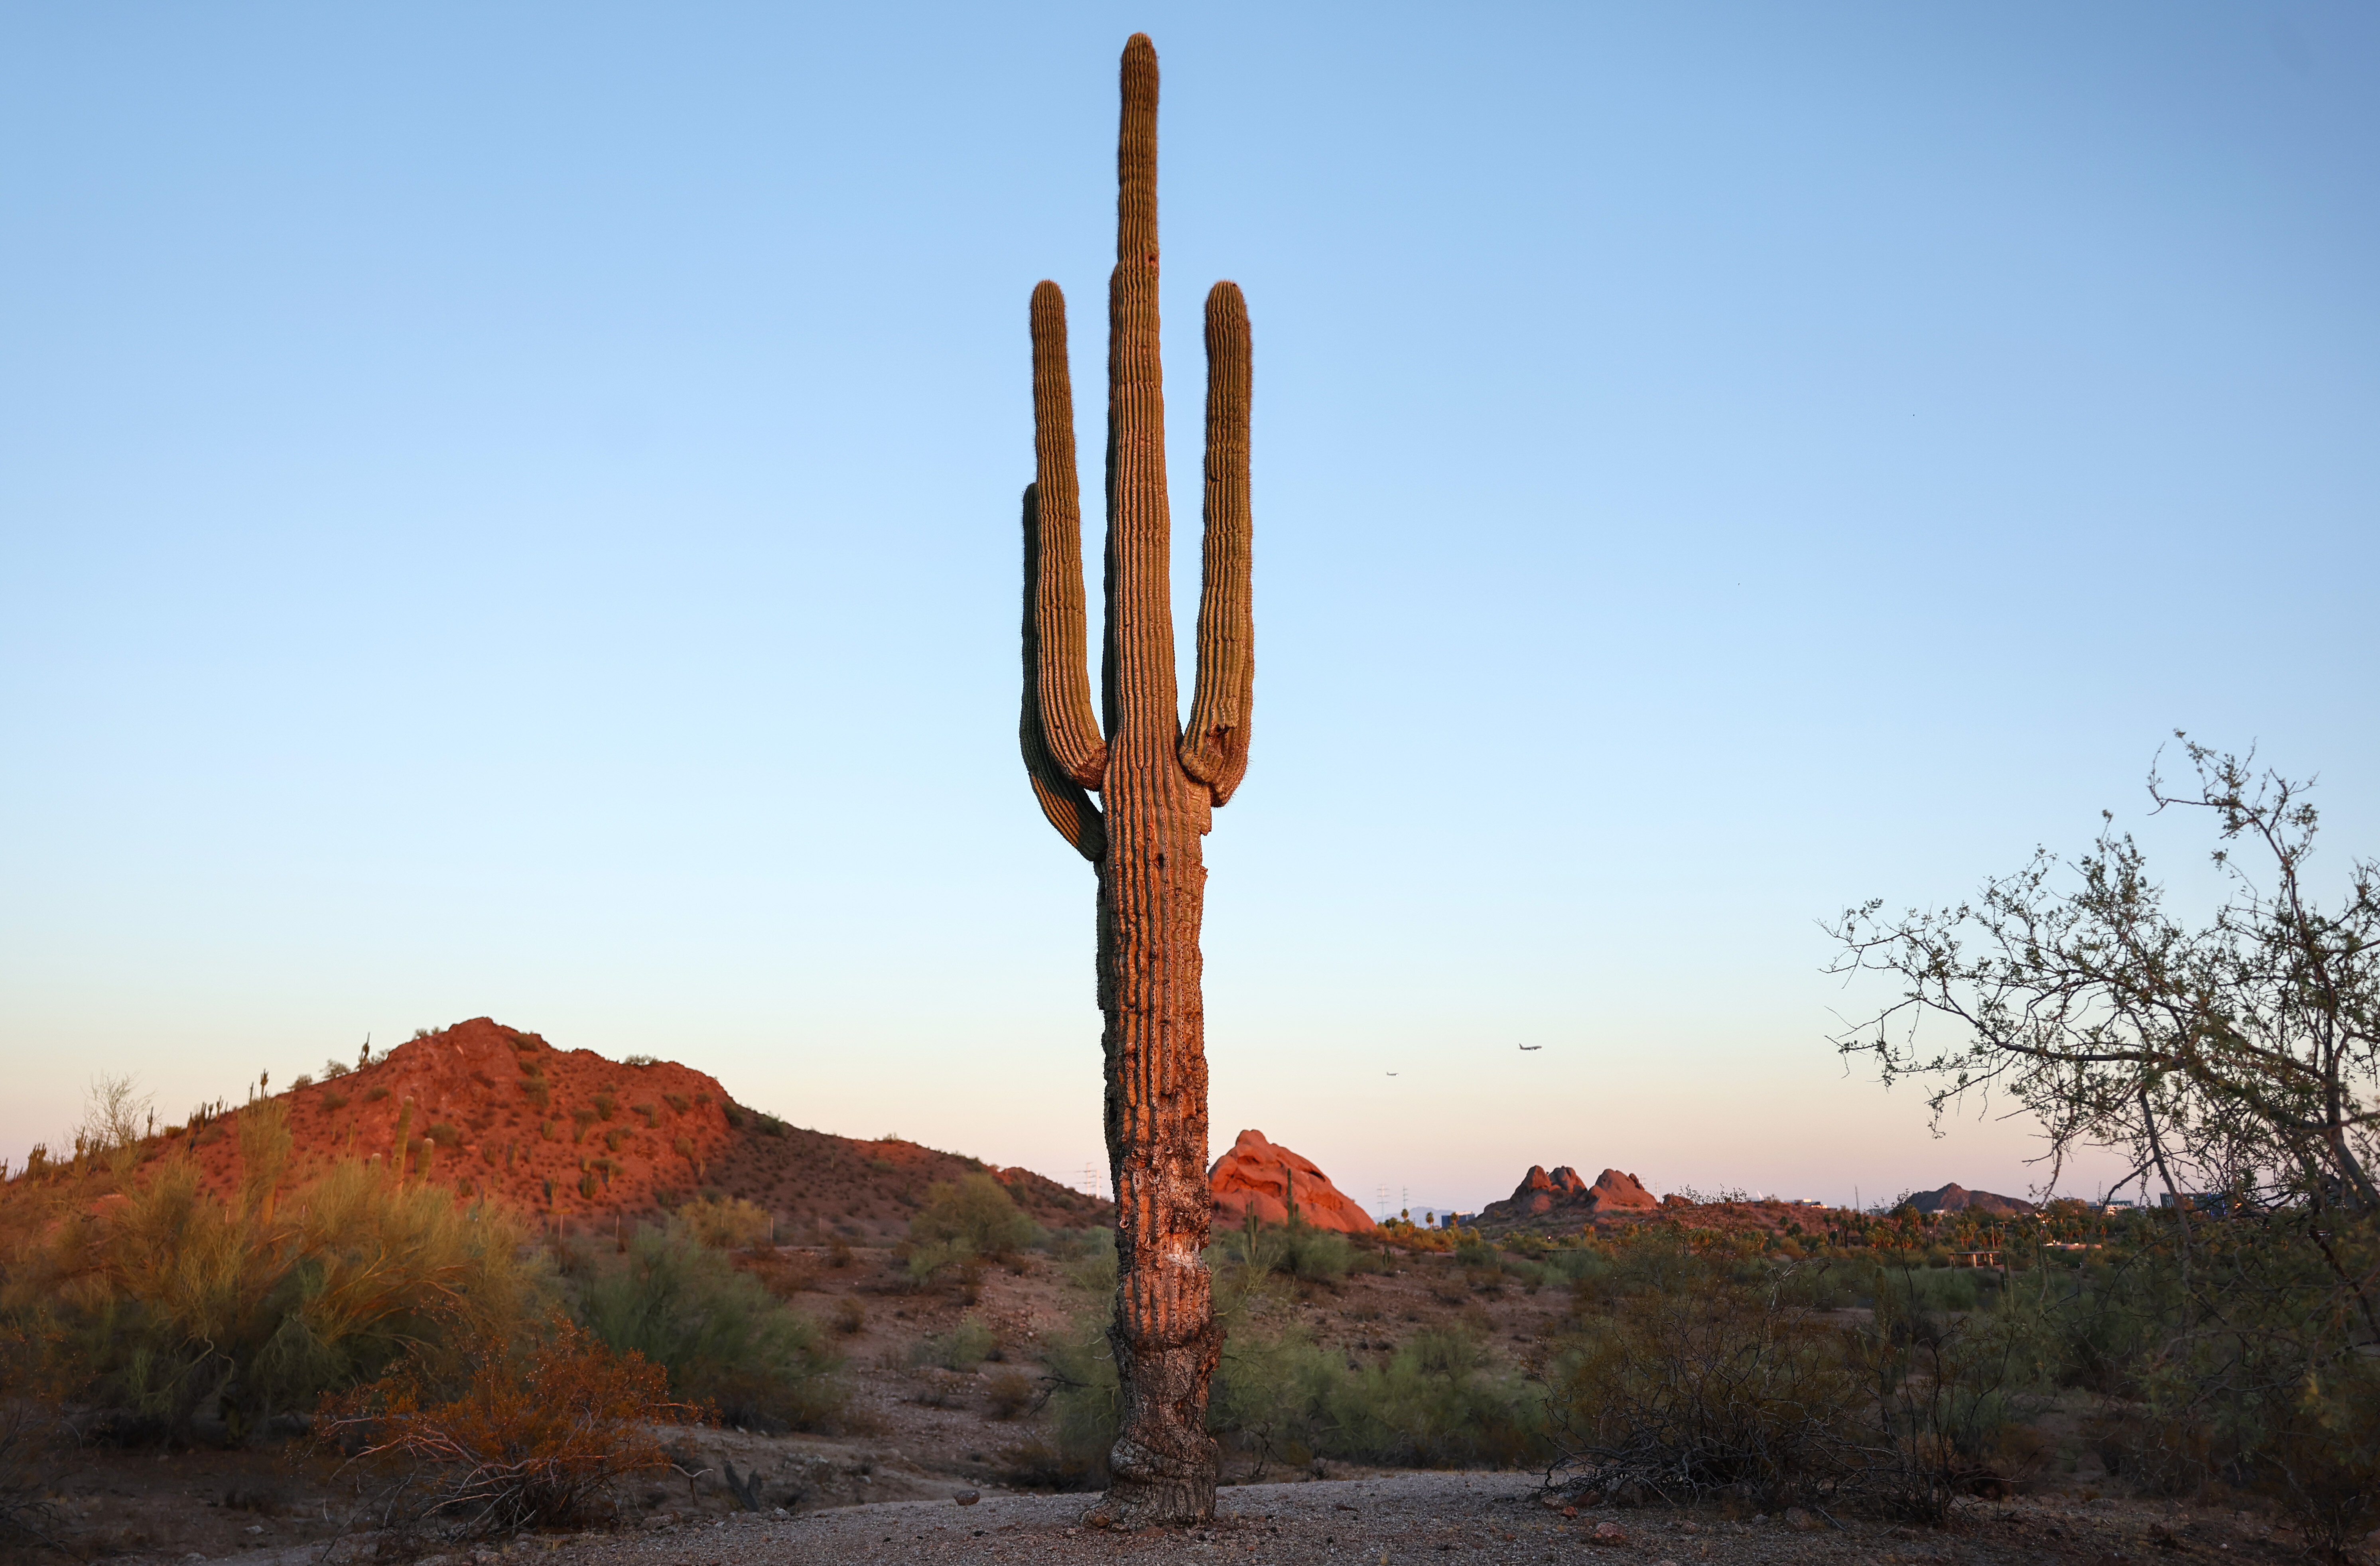 A damaged saguaro cactus stands in the Sonoran Desert in Phoenix in August 2023. The iconic cactuses were under increased stress from extreme heat during Arizona’s brutal summer heat wave and are threatened by a number of issues linked to climate change.